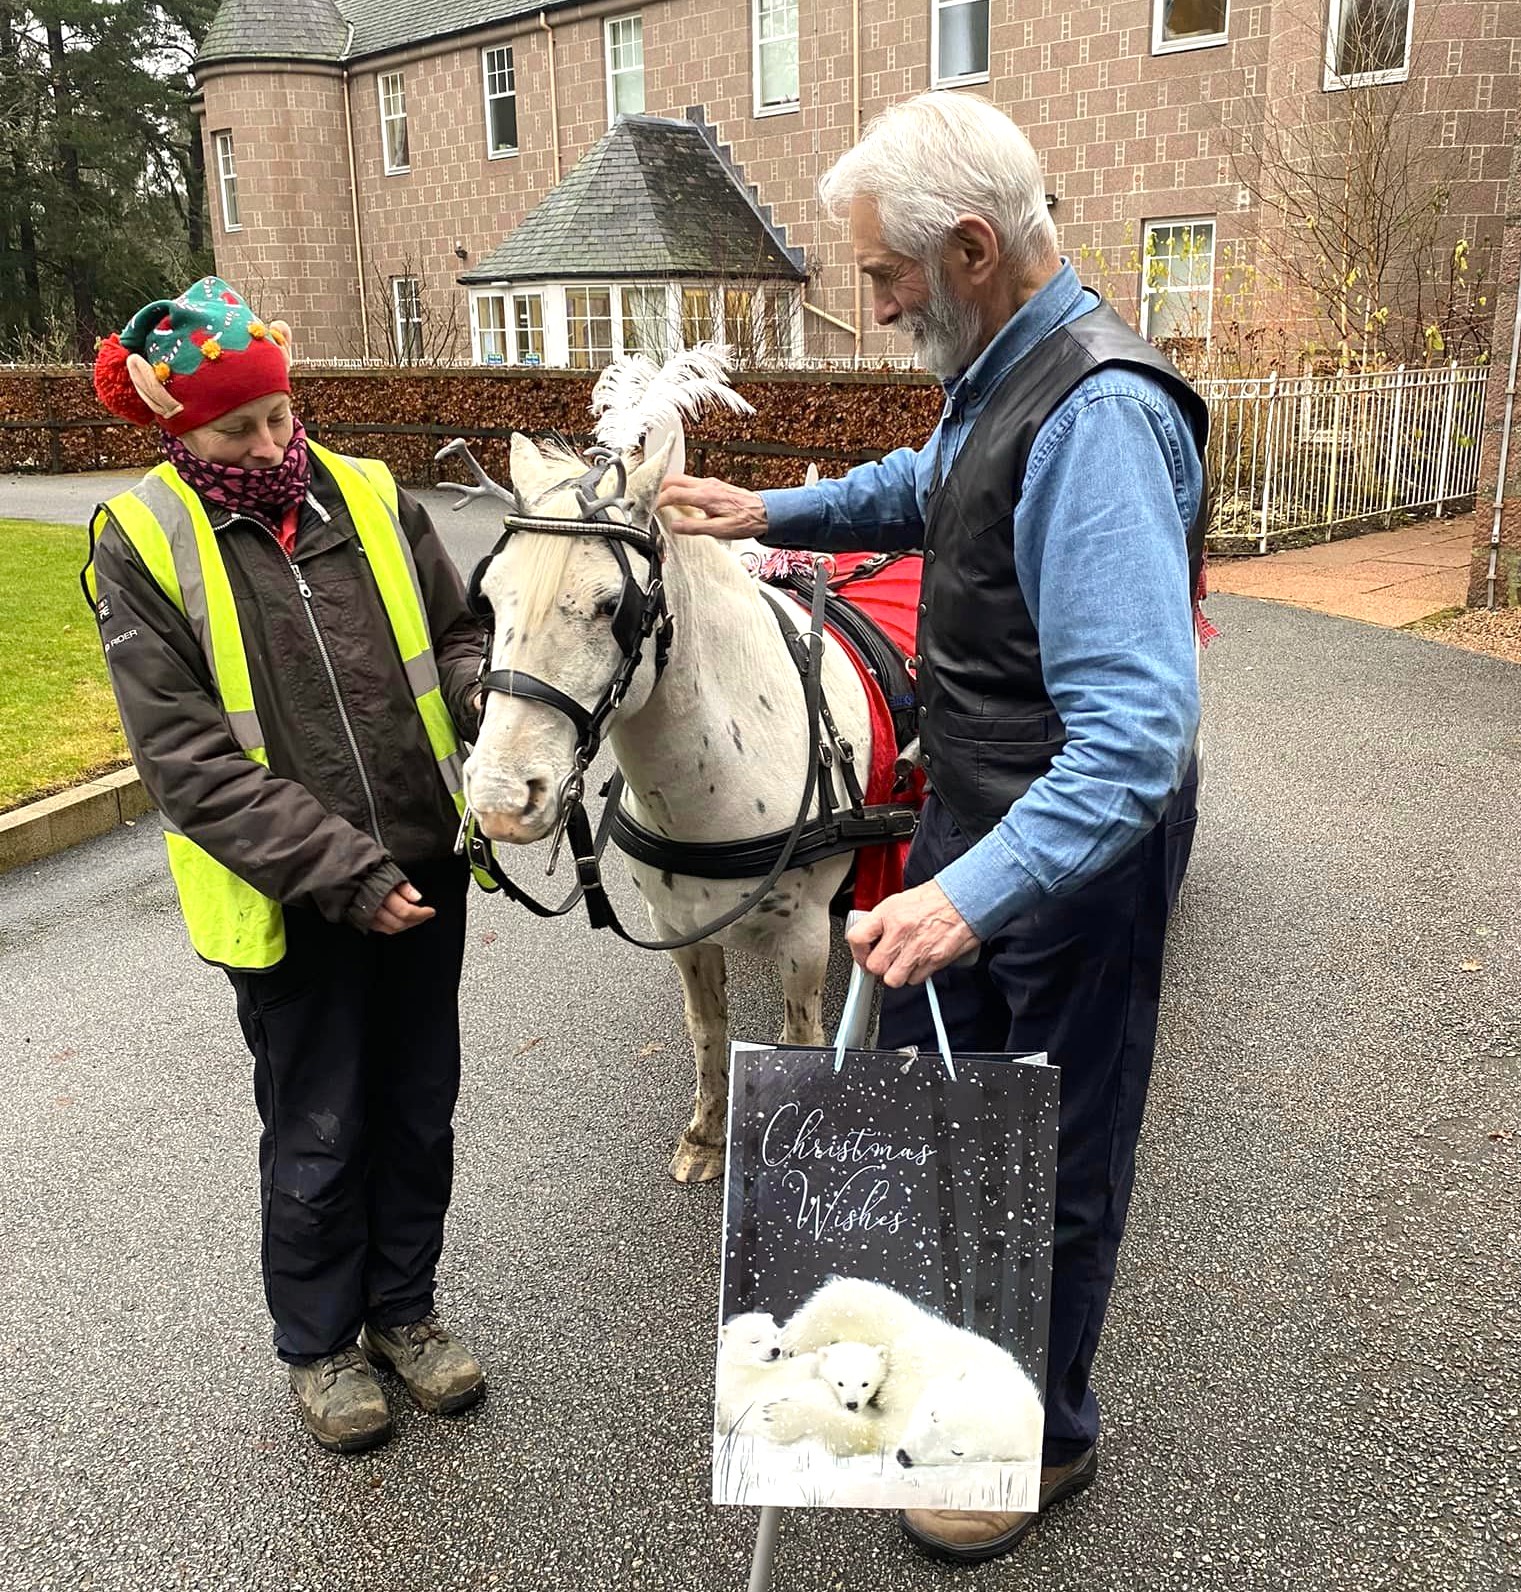 Young at Heart deliver Christmas gifts to residents at Balhousie Alastrean.